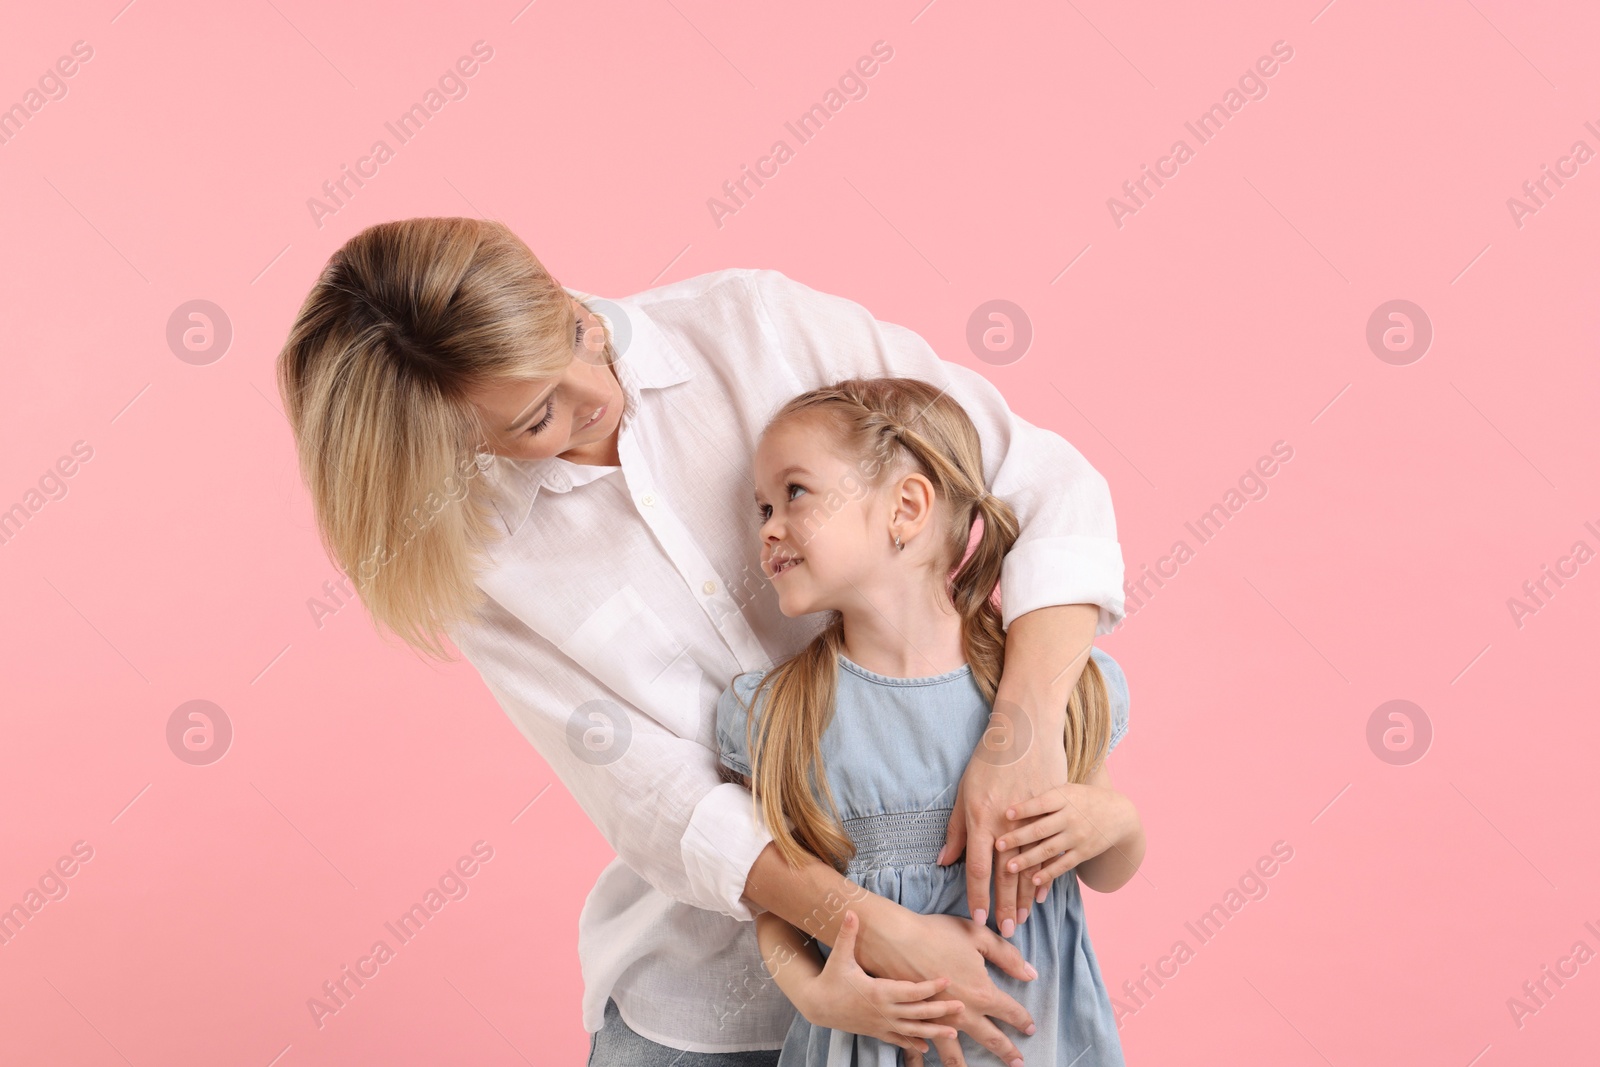 Photo of Family portrait of happy mother and daughter on pink background